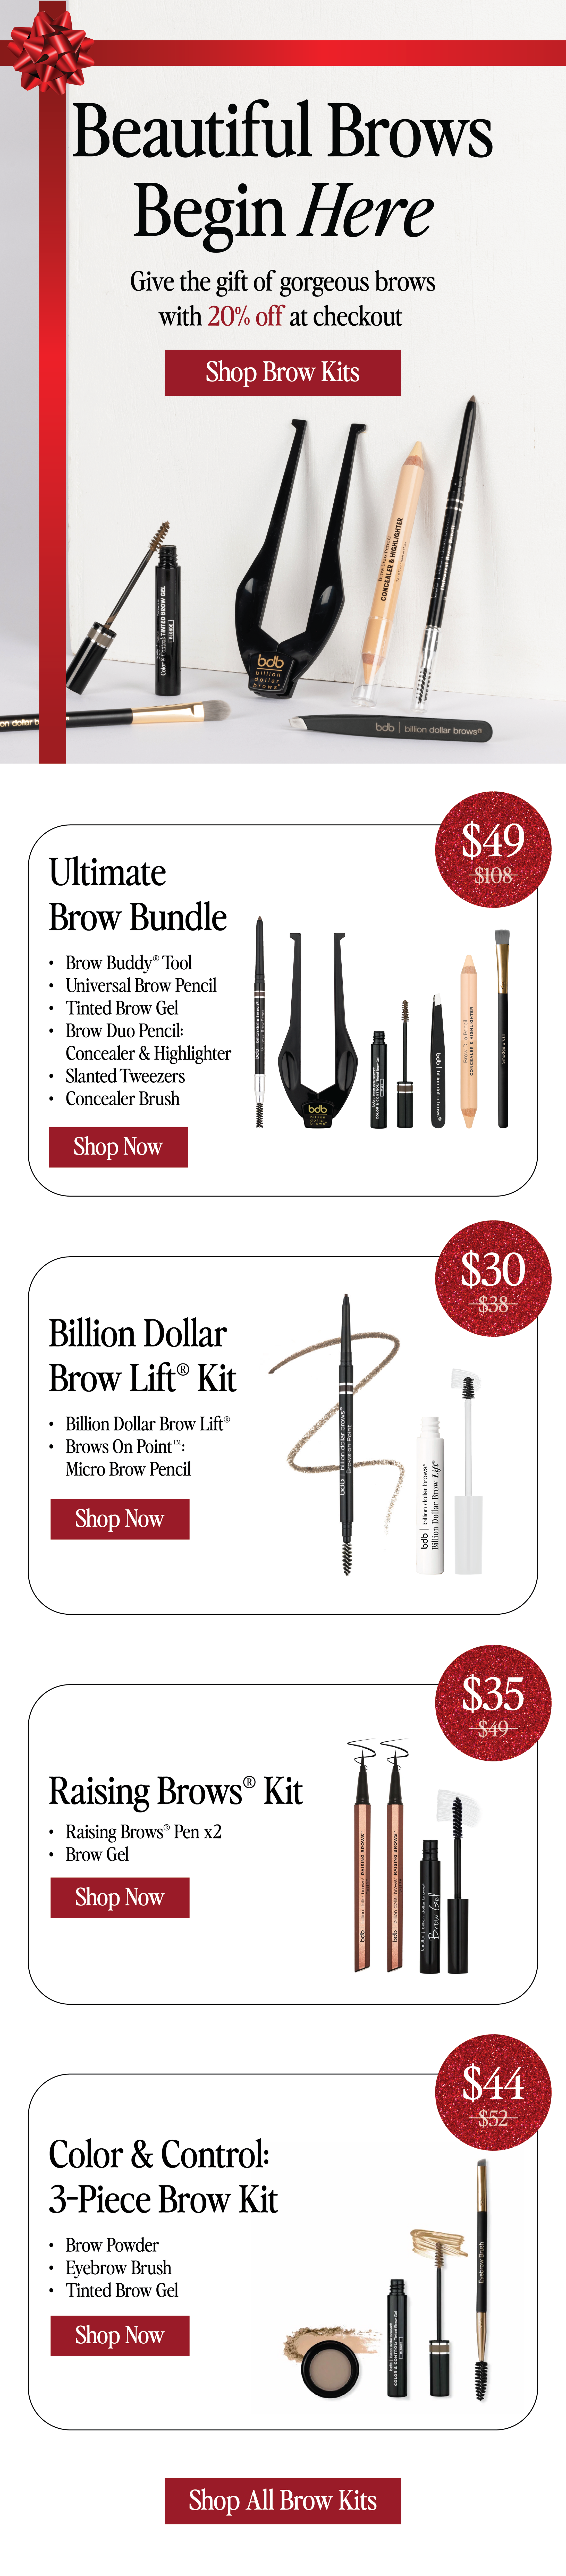 Brow Kits = Perfect Gifts.png